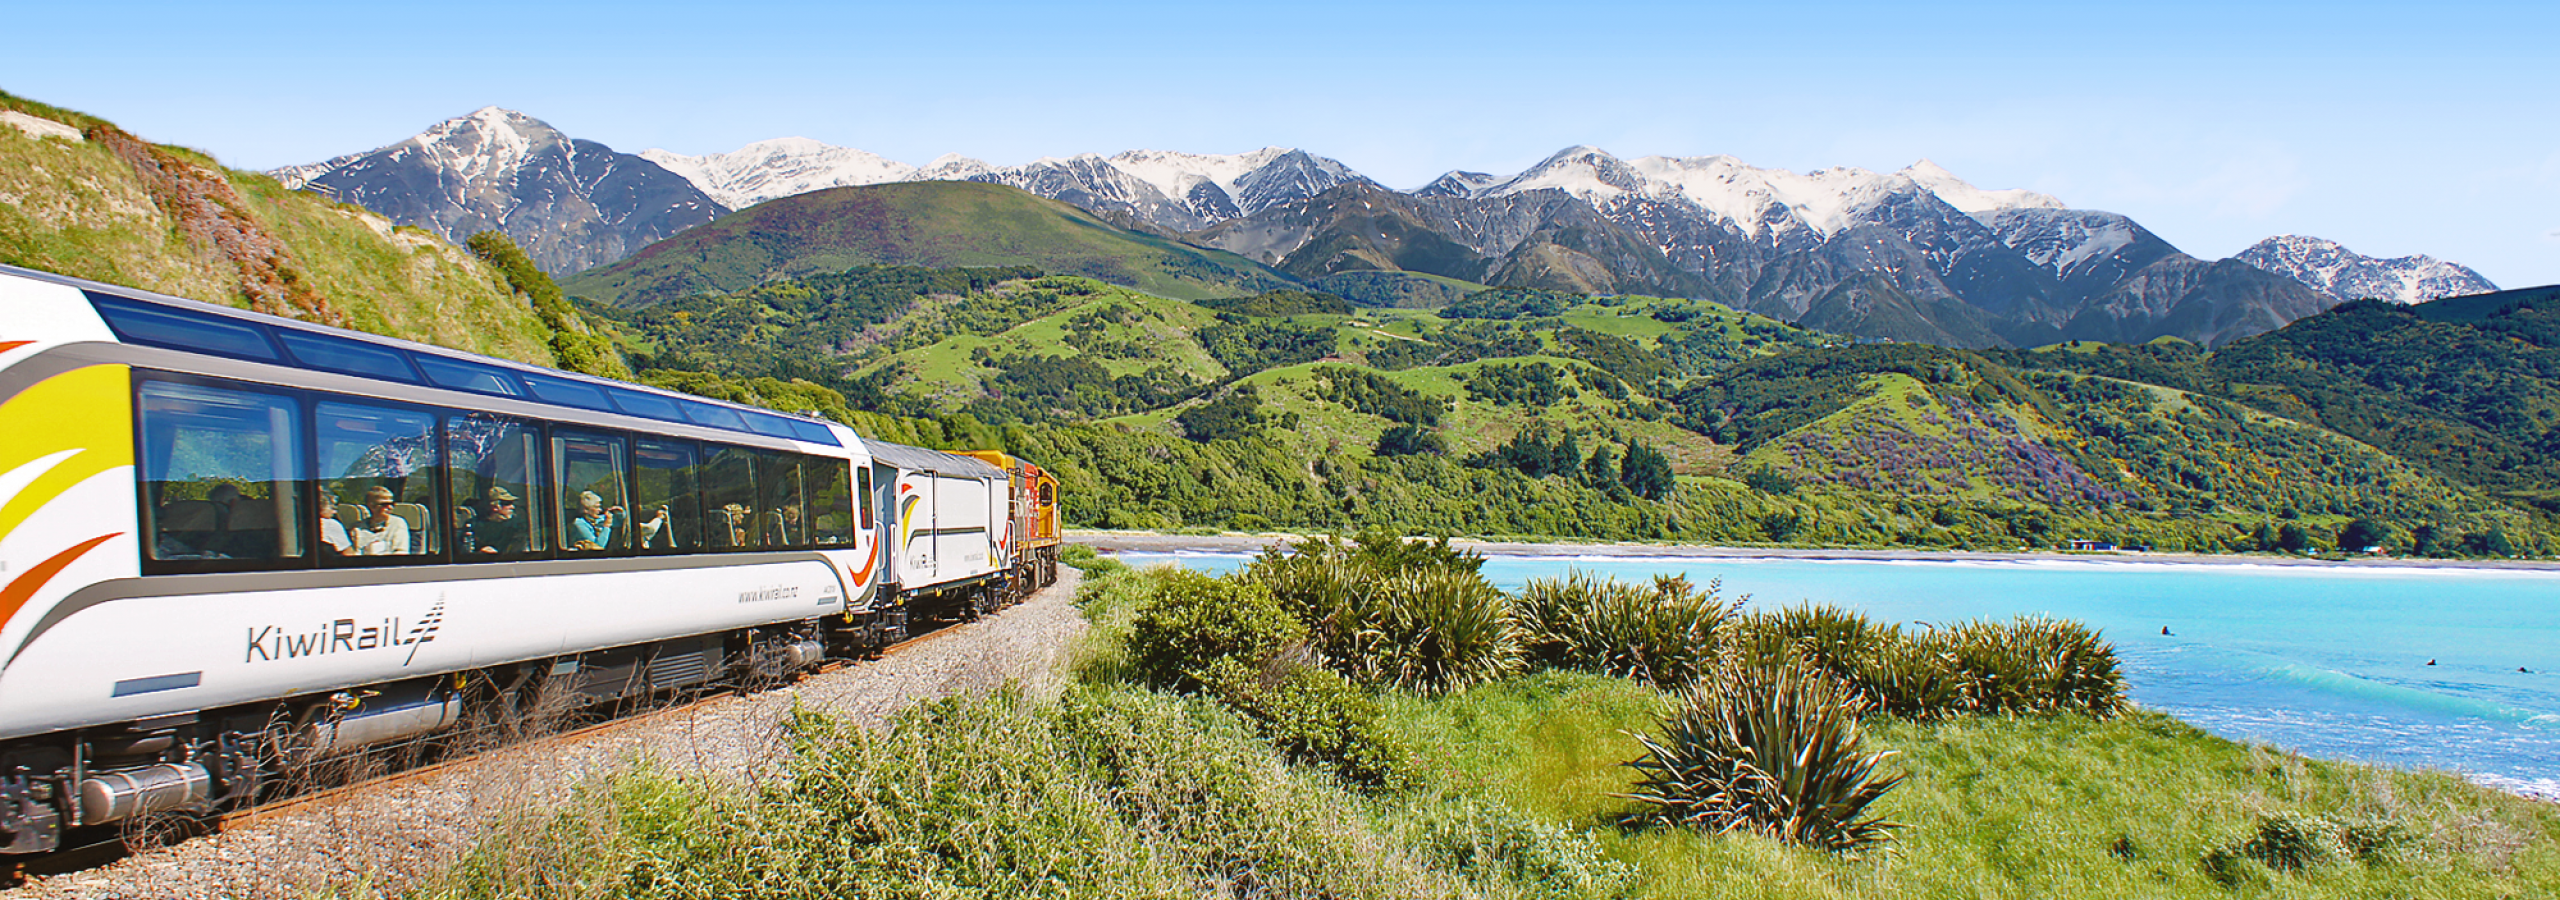 The Great New Zealand Train Journey